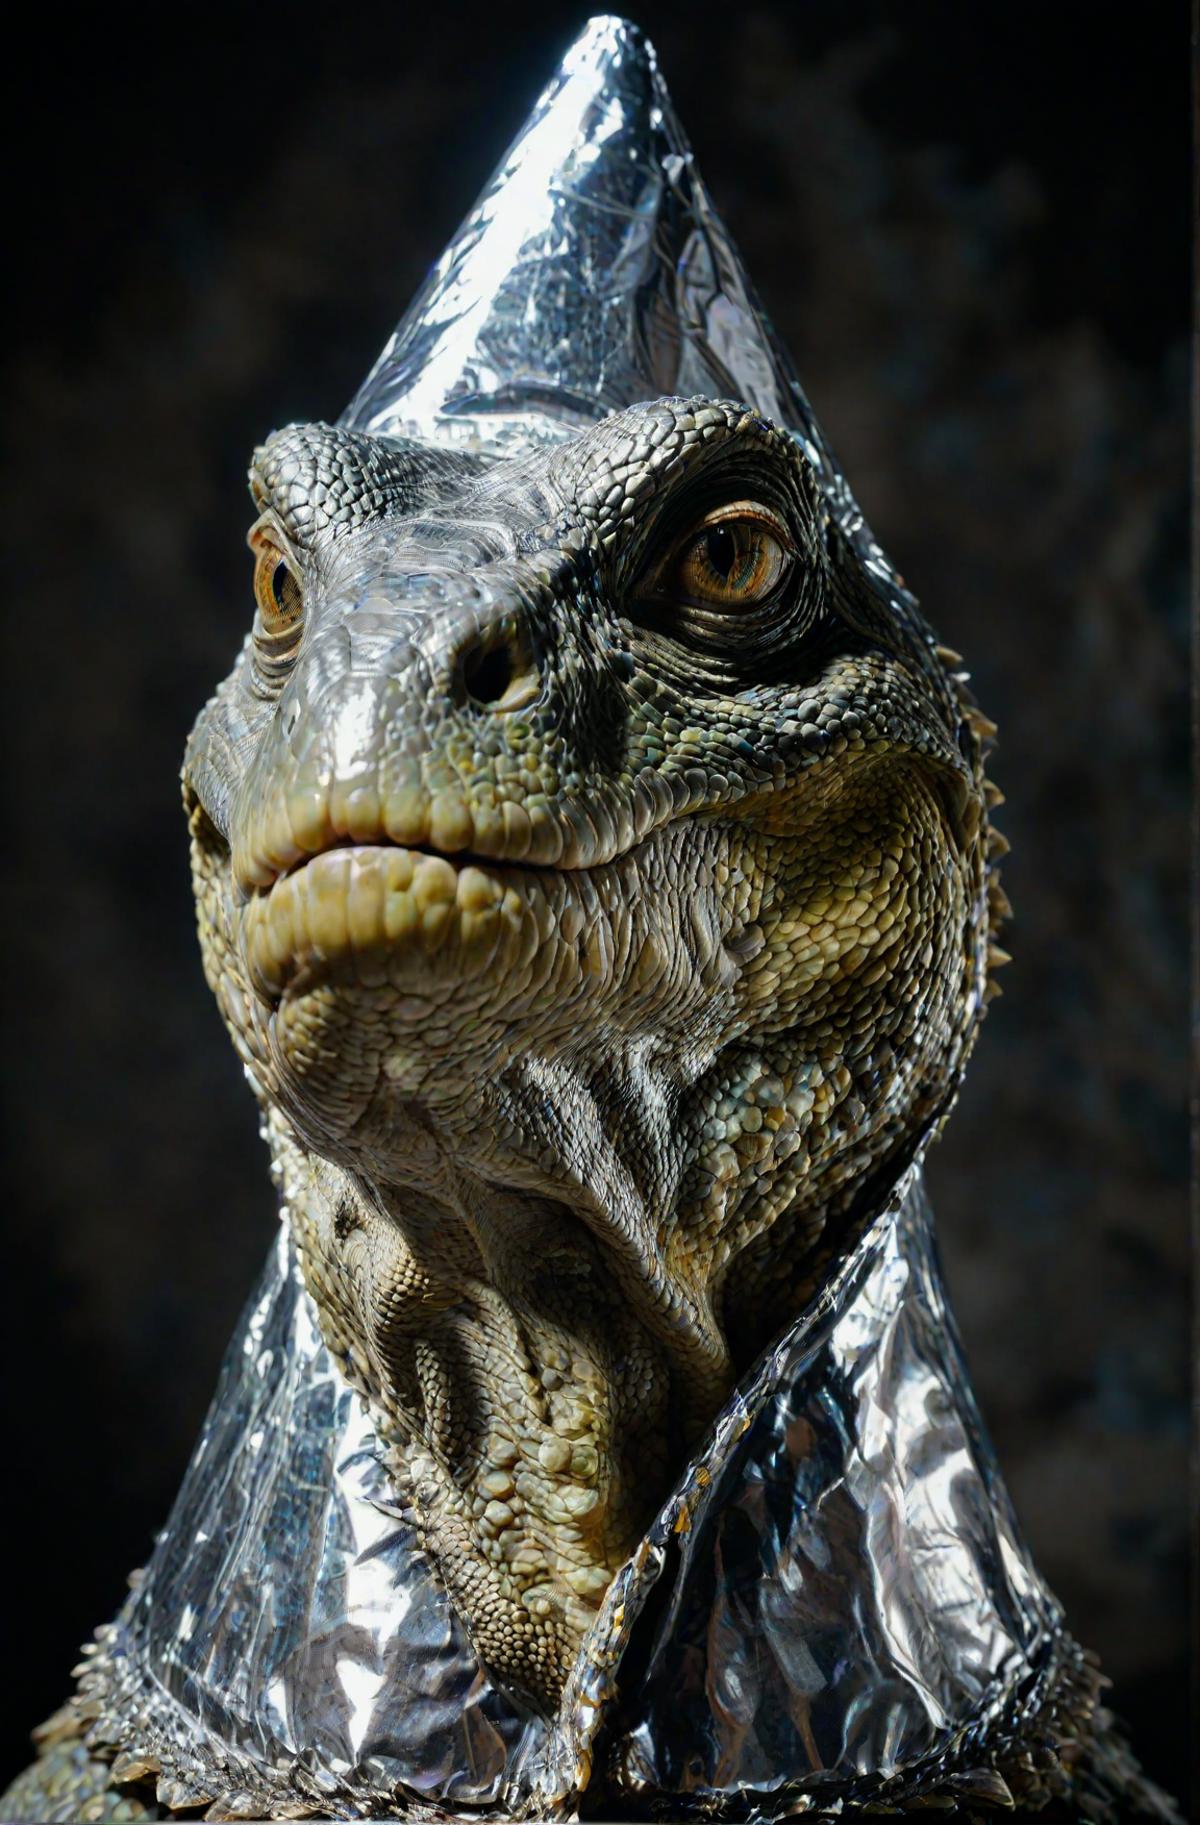 A Dinosaur-like creature with a metal hat and a metallic head dress.